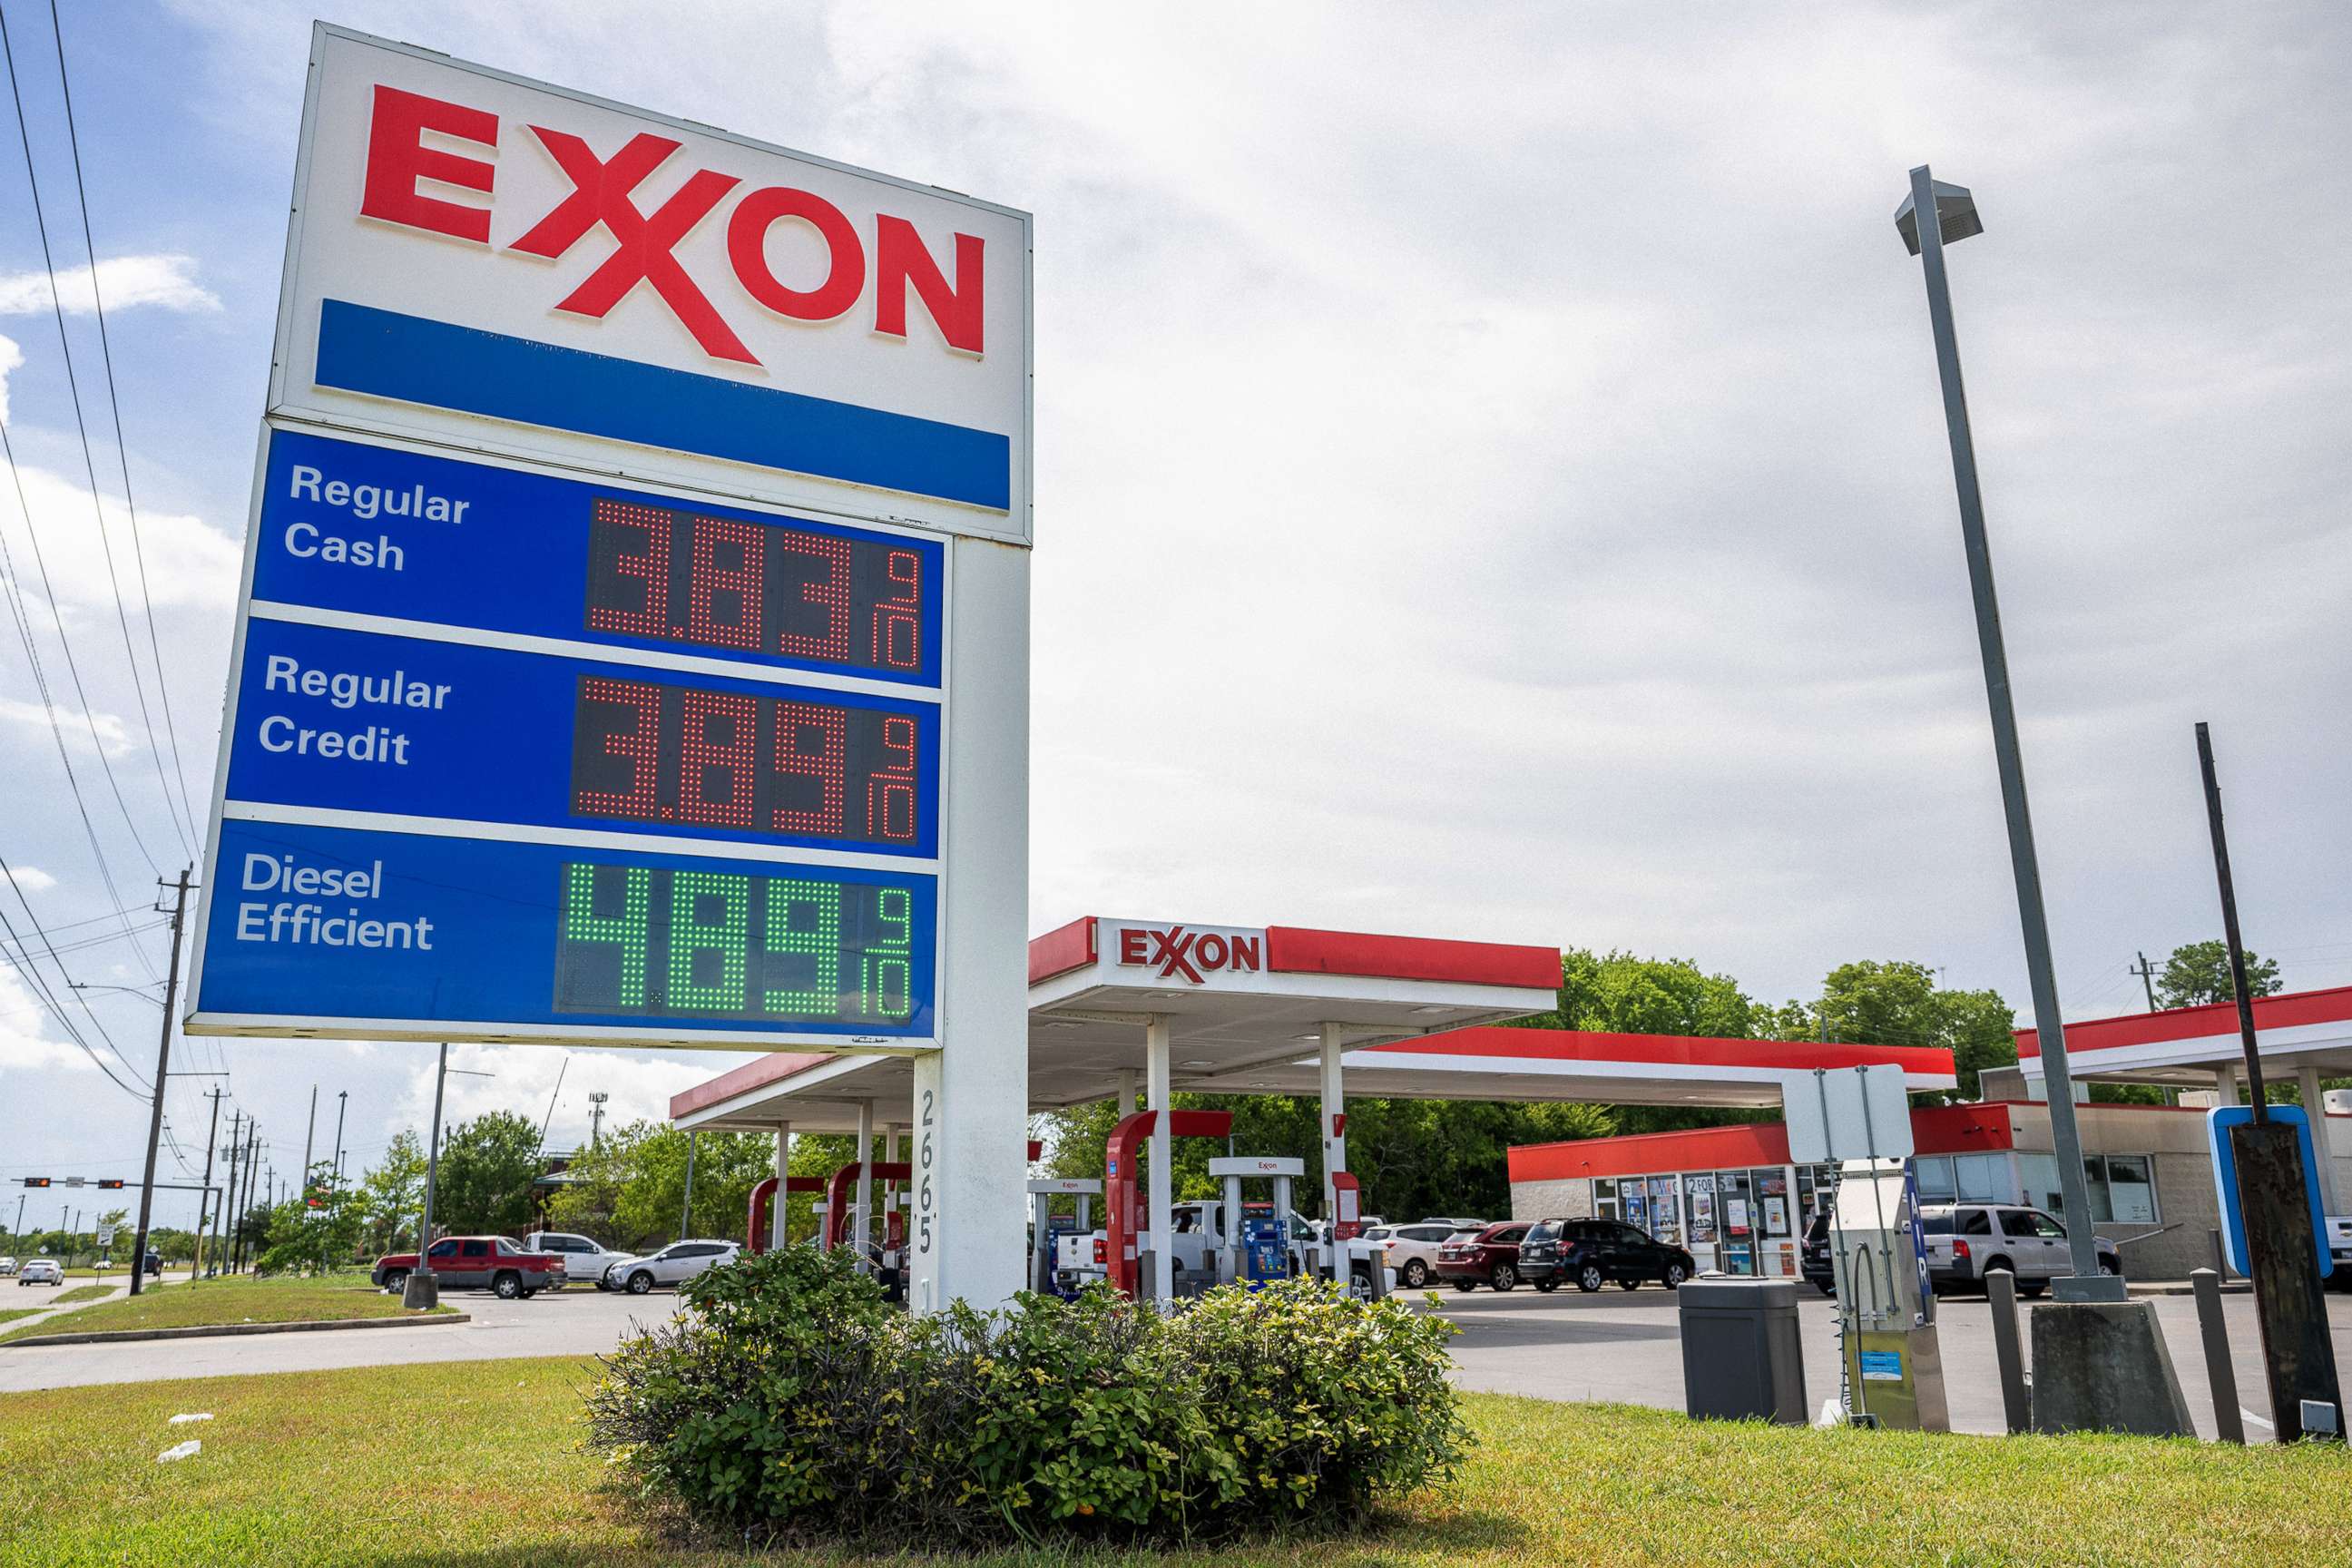 PHOTO: Gas prices are displayed at an Exxon gas station on July 29, 2022 in Houston.